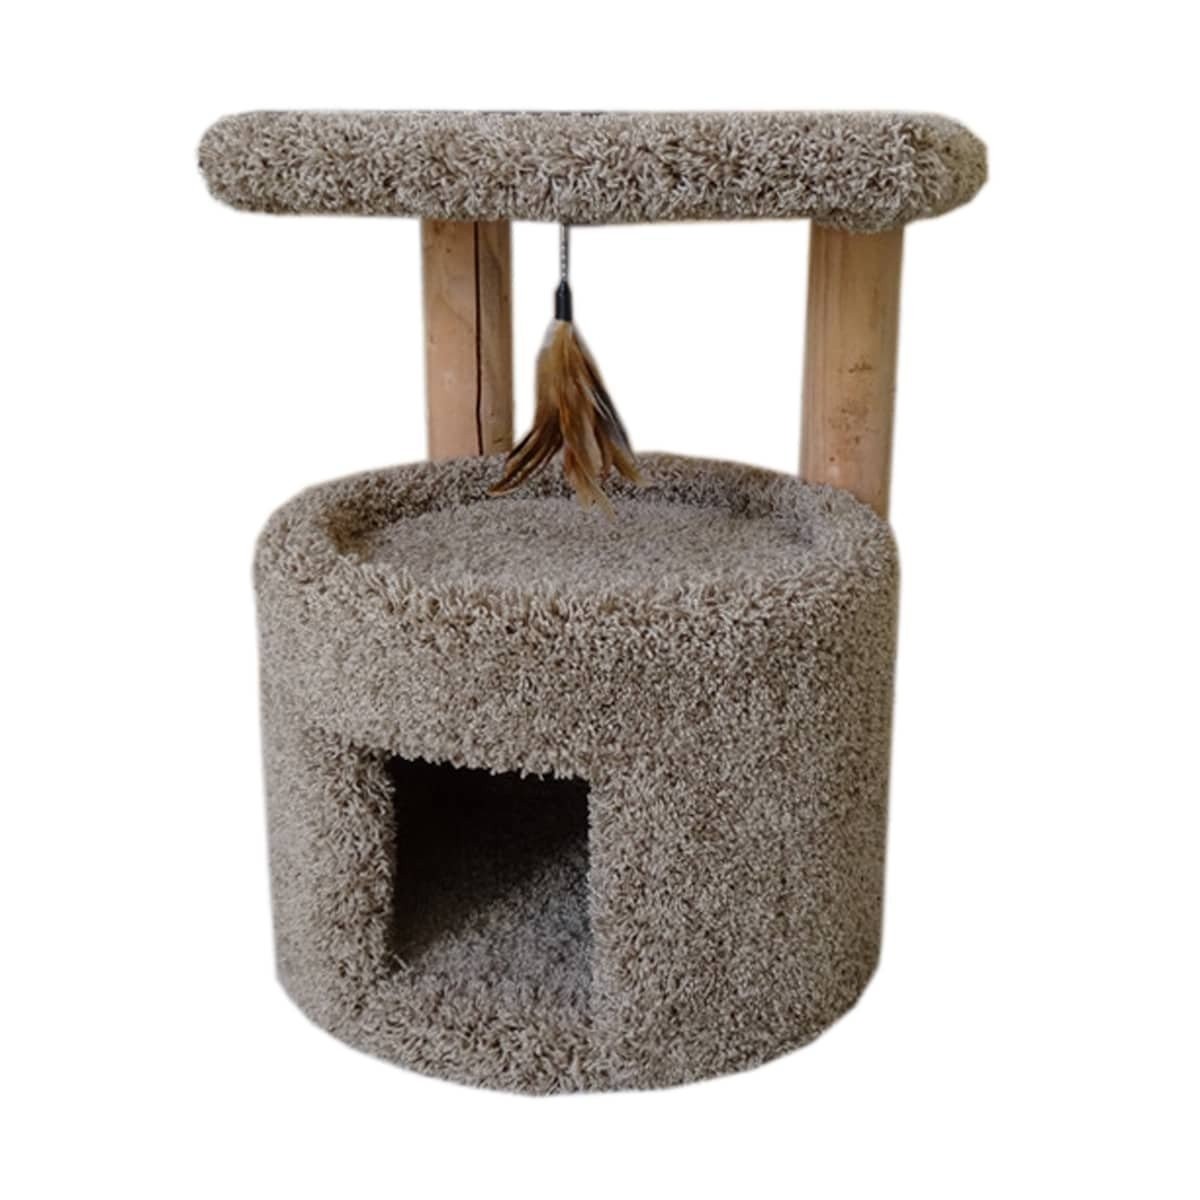 Small Cat Condo With Carpet Lining